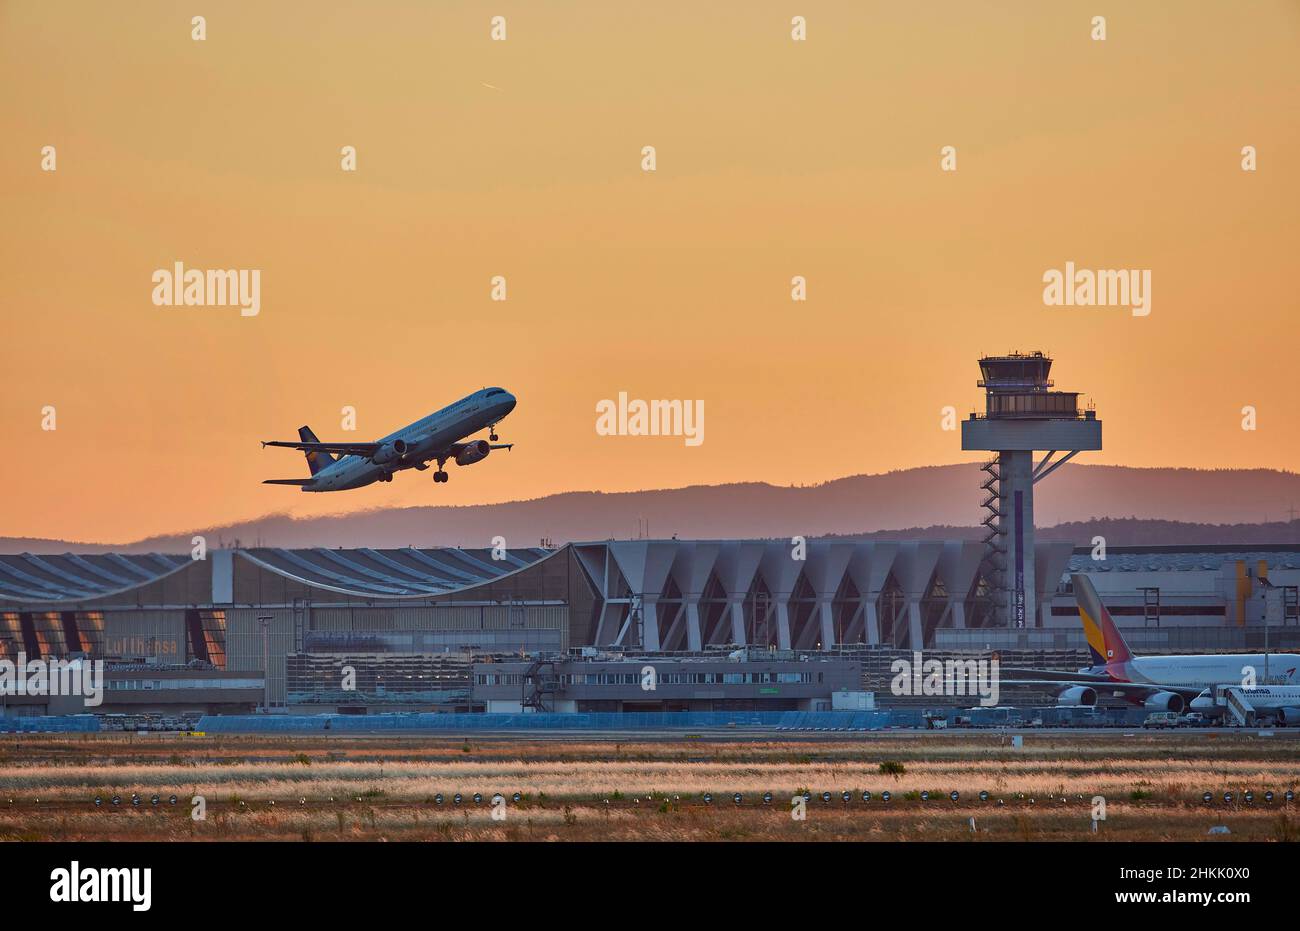 Airbus A321-200 taking off Frankfurt airport at dusk, in the background the maintenance hangar for jumbo jets, Germany, Hesse, Frankfurt Stock Photo